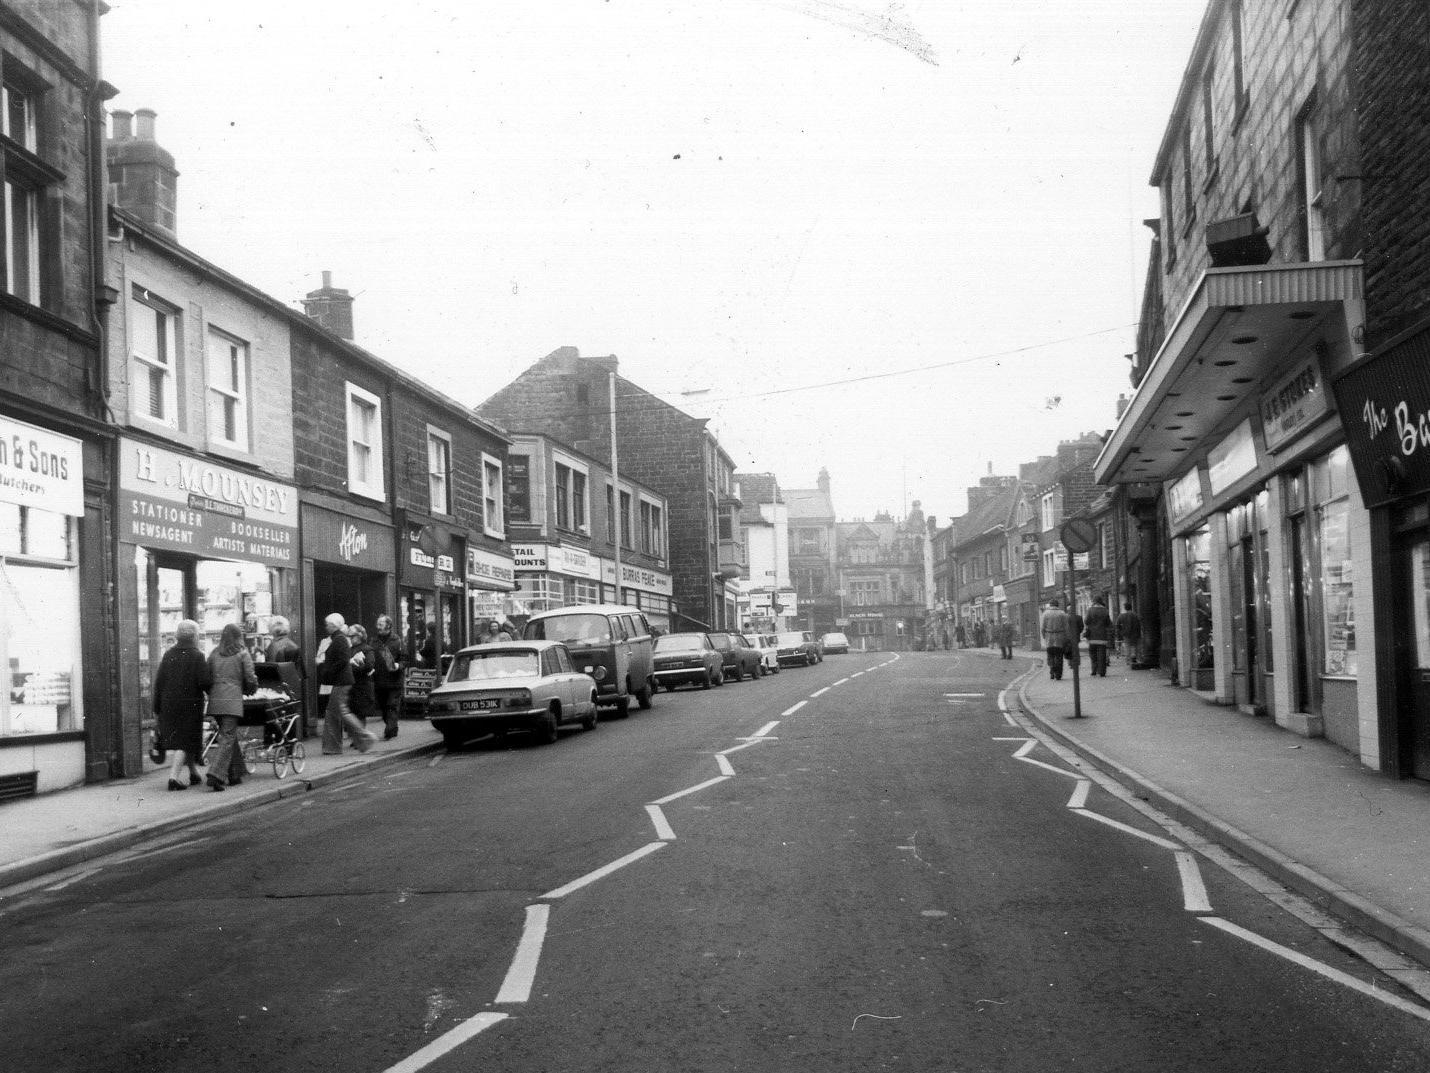 Boroughgate. Shops visible, on the left, include J.B. Wilkinson & Sons, butchers, H. Mounsey, stationer and Afton ladieswear. On the right are John Wood's Barber Shop, J.E. Stokes Ltd., fancy goods, and R.A. Stores, camping.